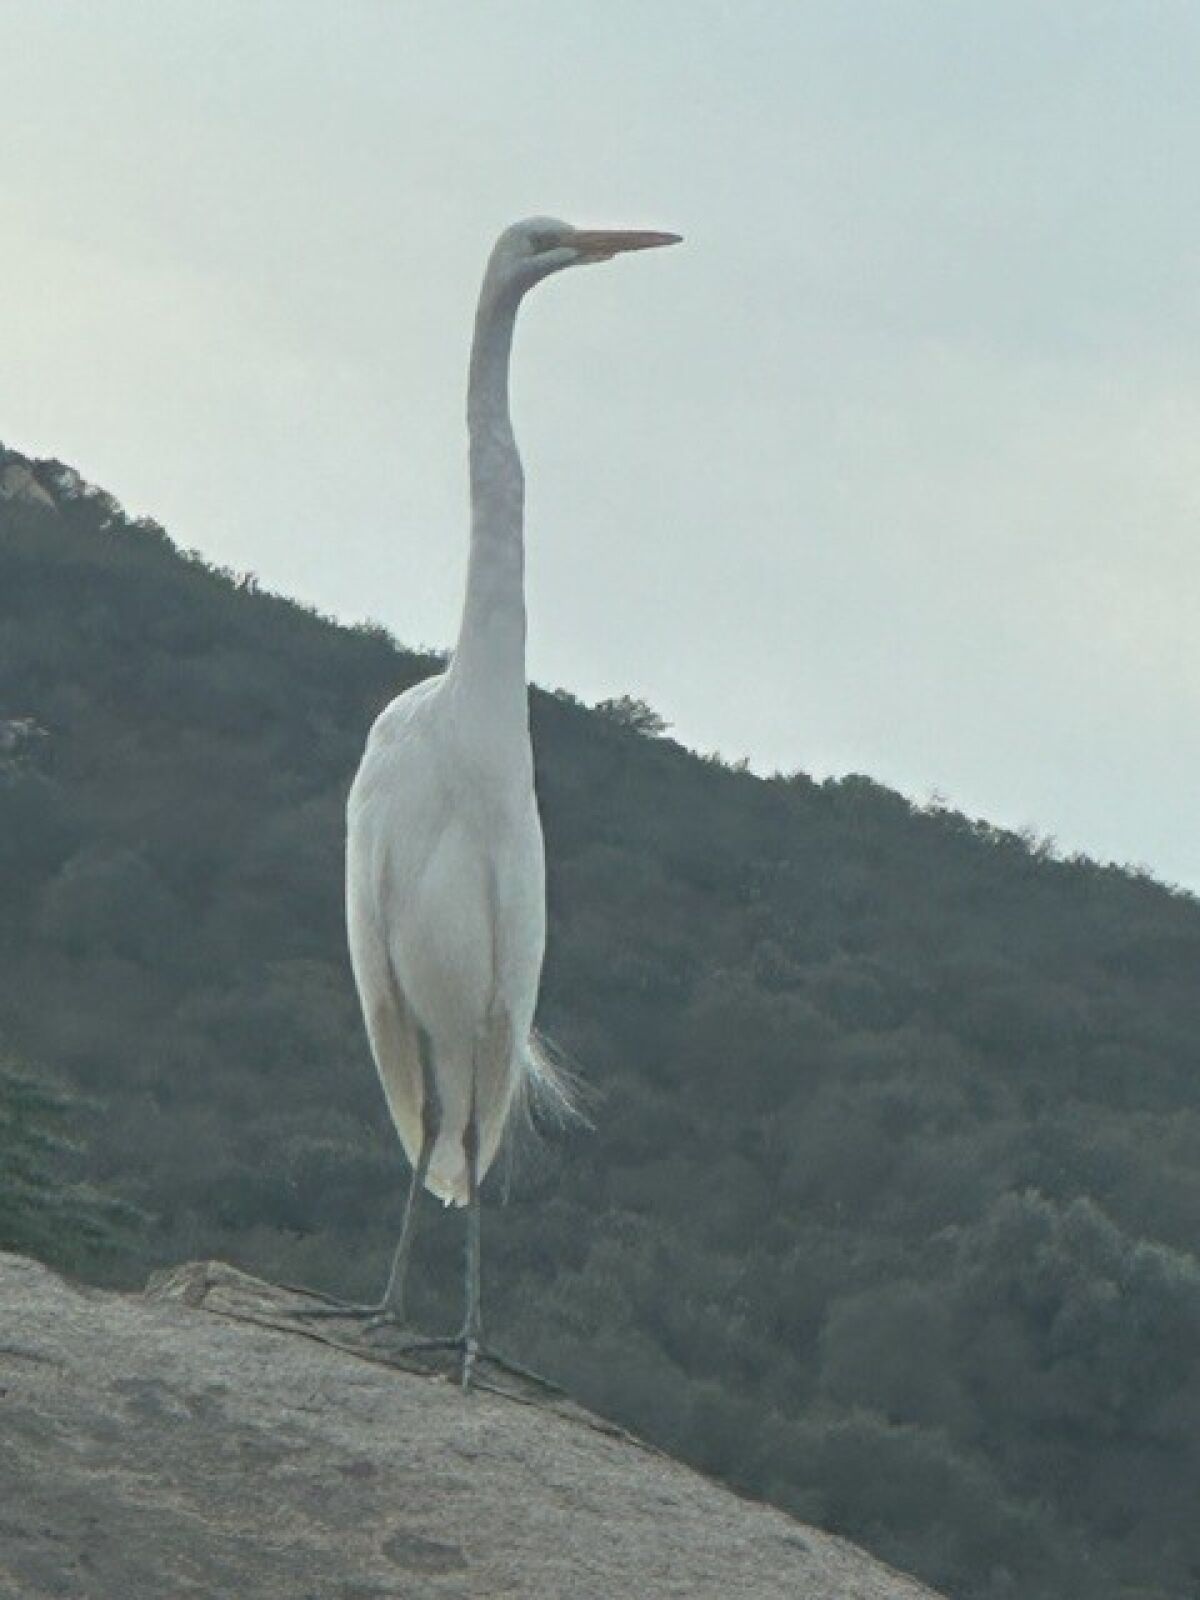 Randy Newhard sent this photo of a large white egret that landed on one of the boulders at his house in Ramona.